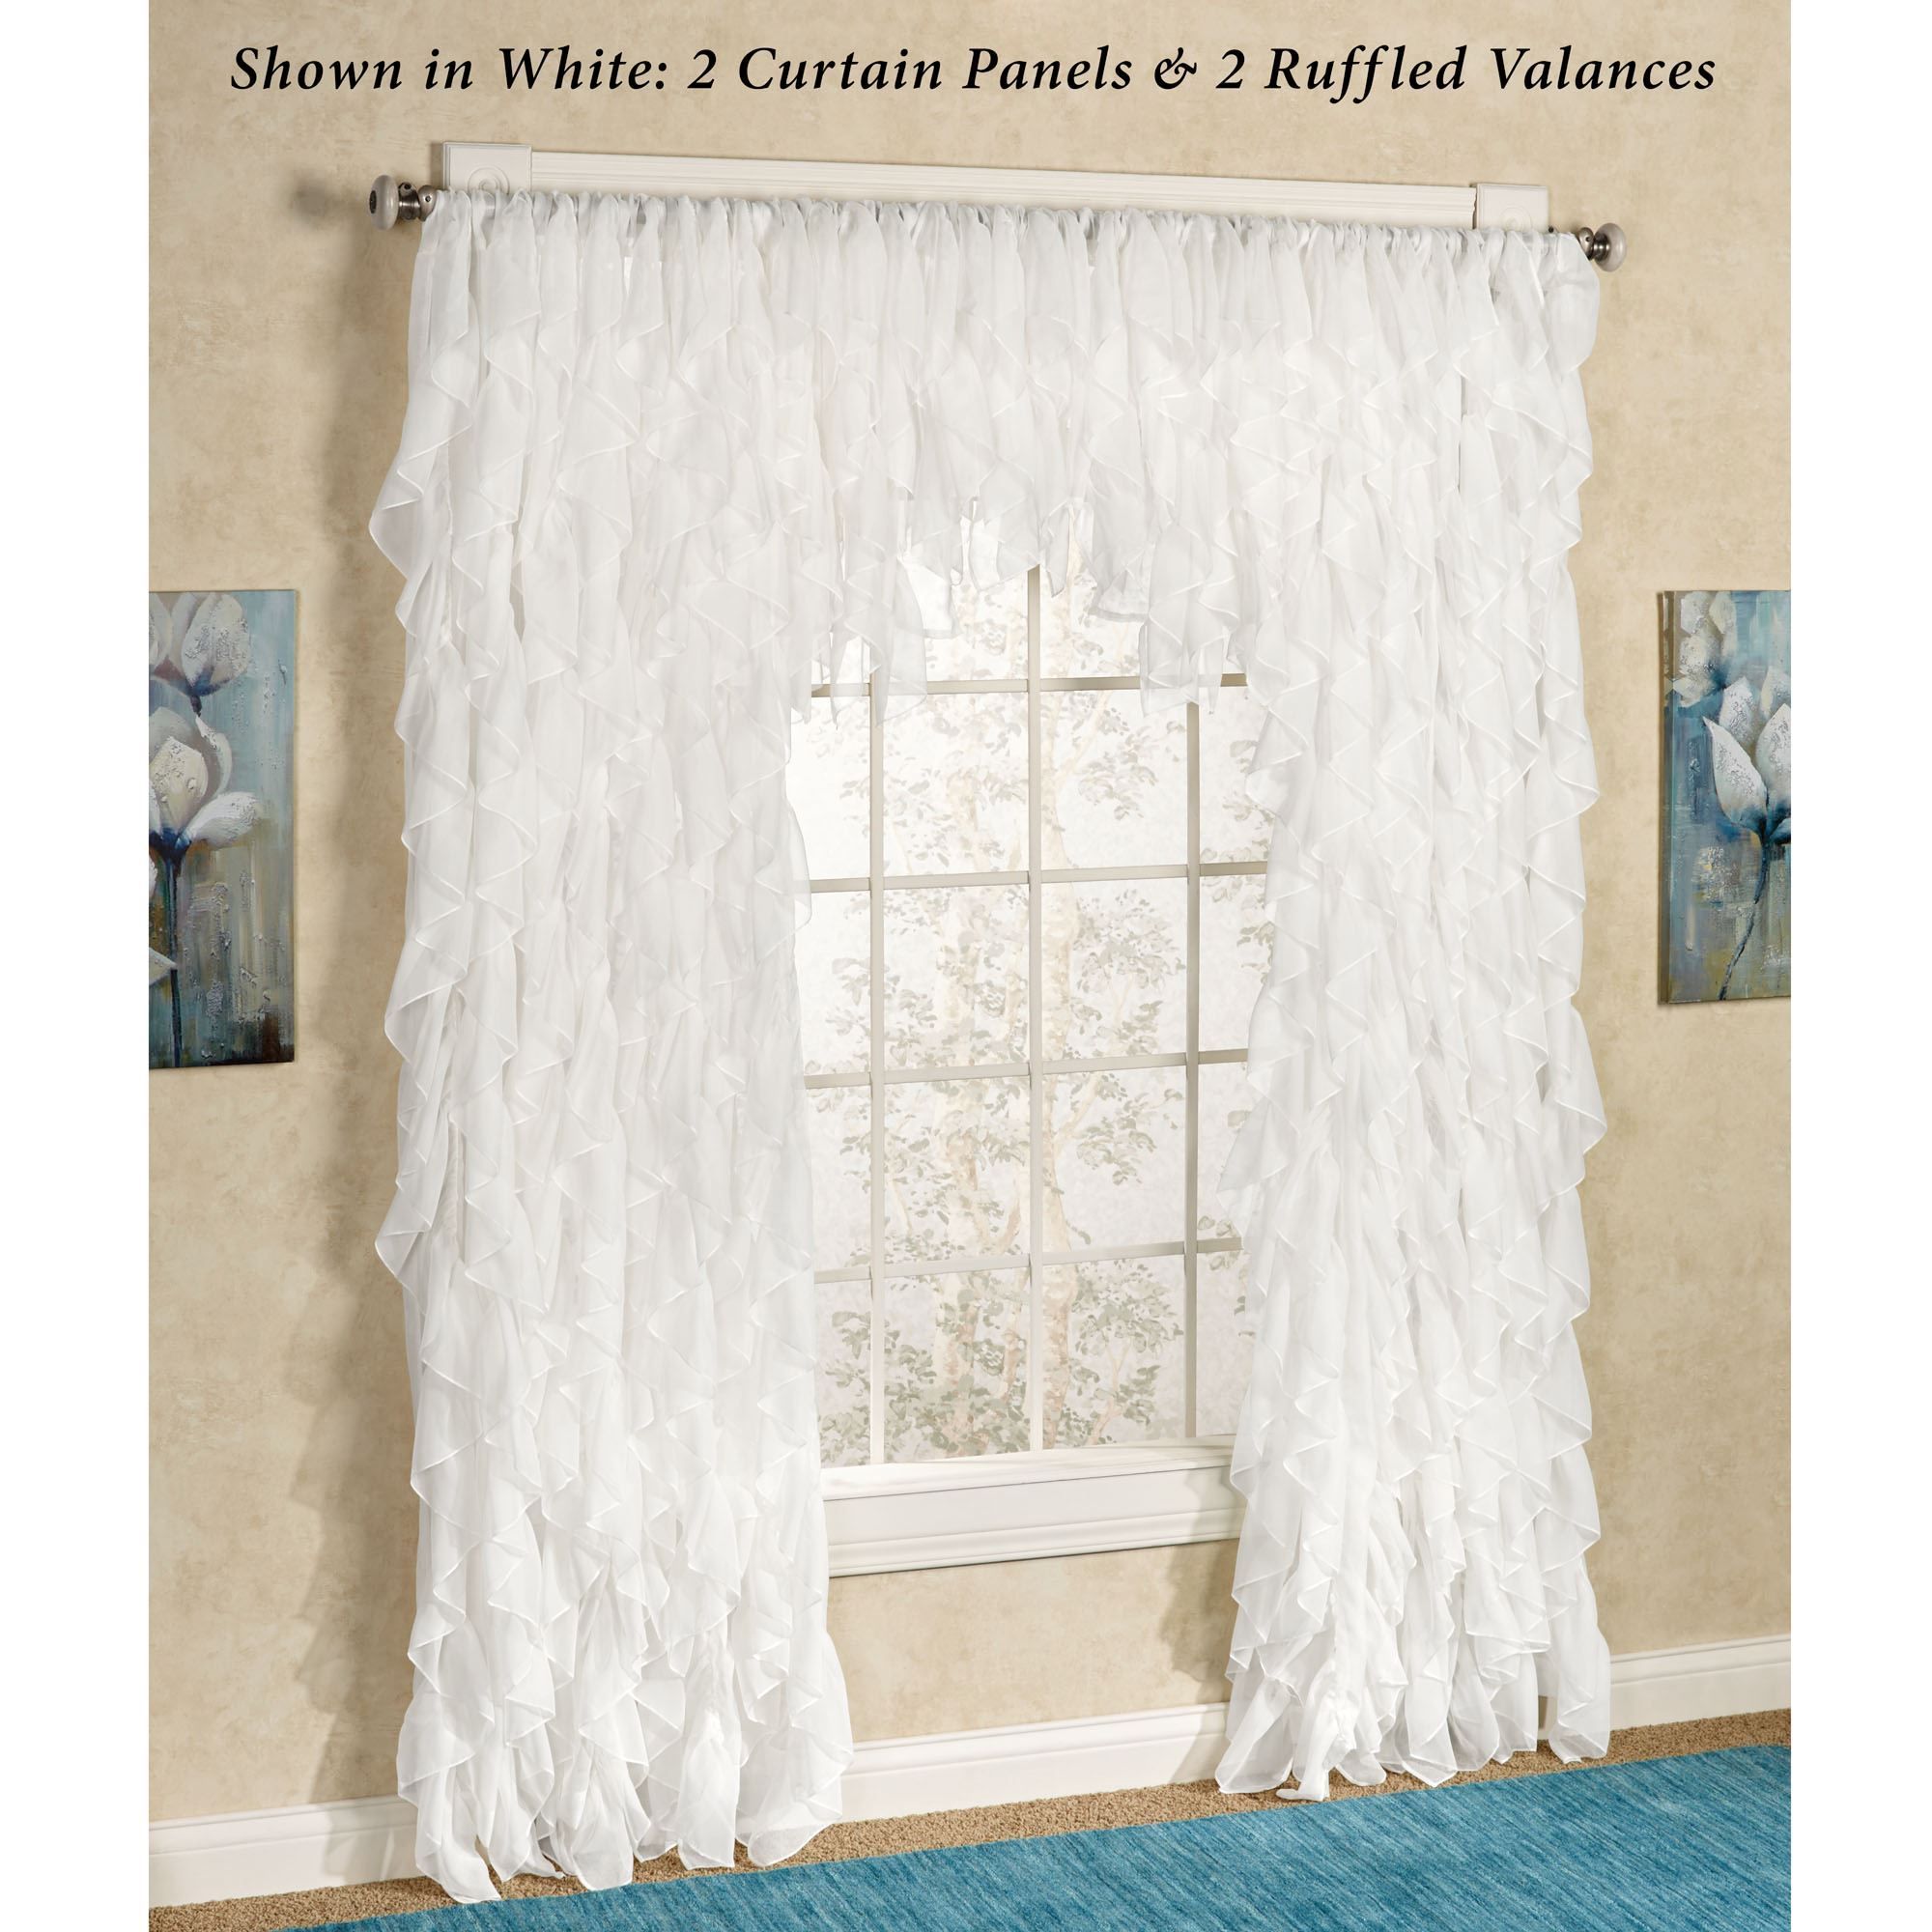 Cascade Sheer Voile Ruffled Window Treatment Within Vertical Ruffled Waterfall Valances And Curtain Tiers (View 12 of 20)